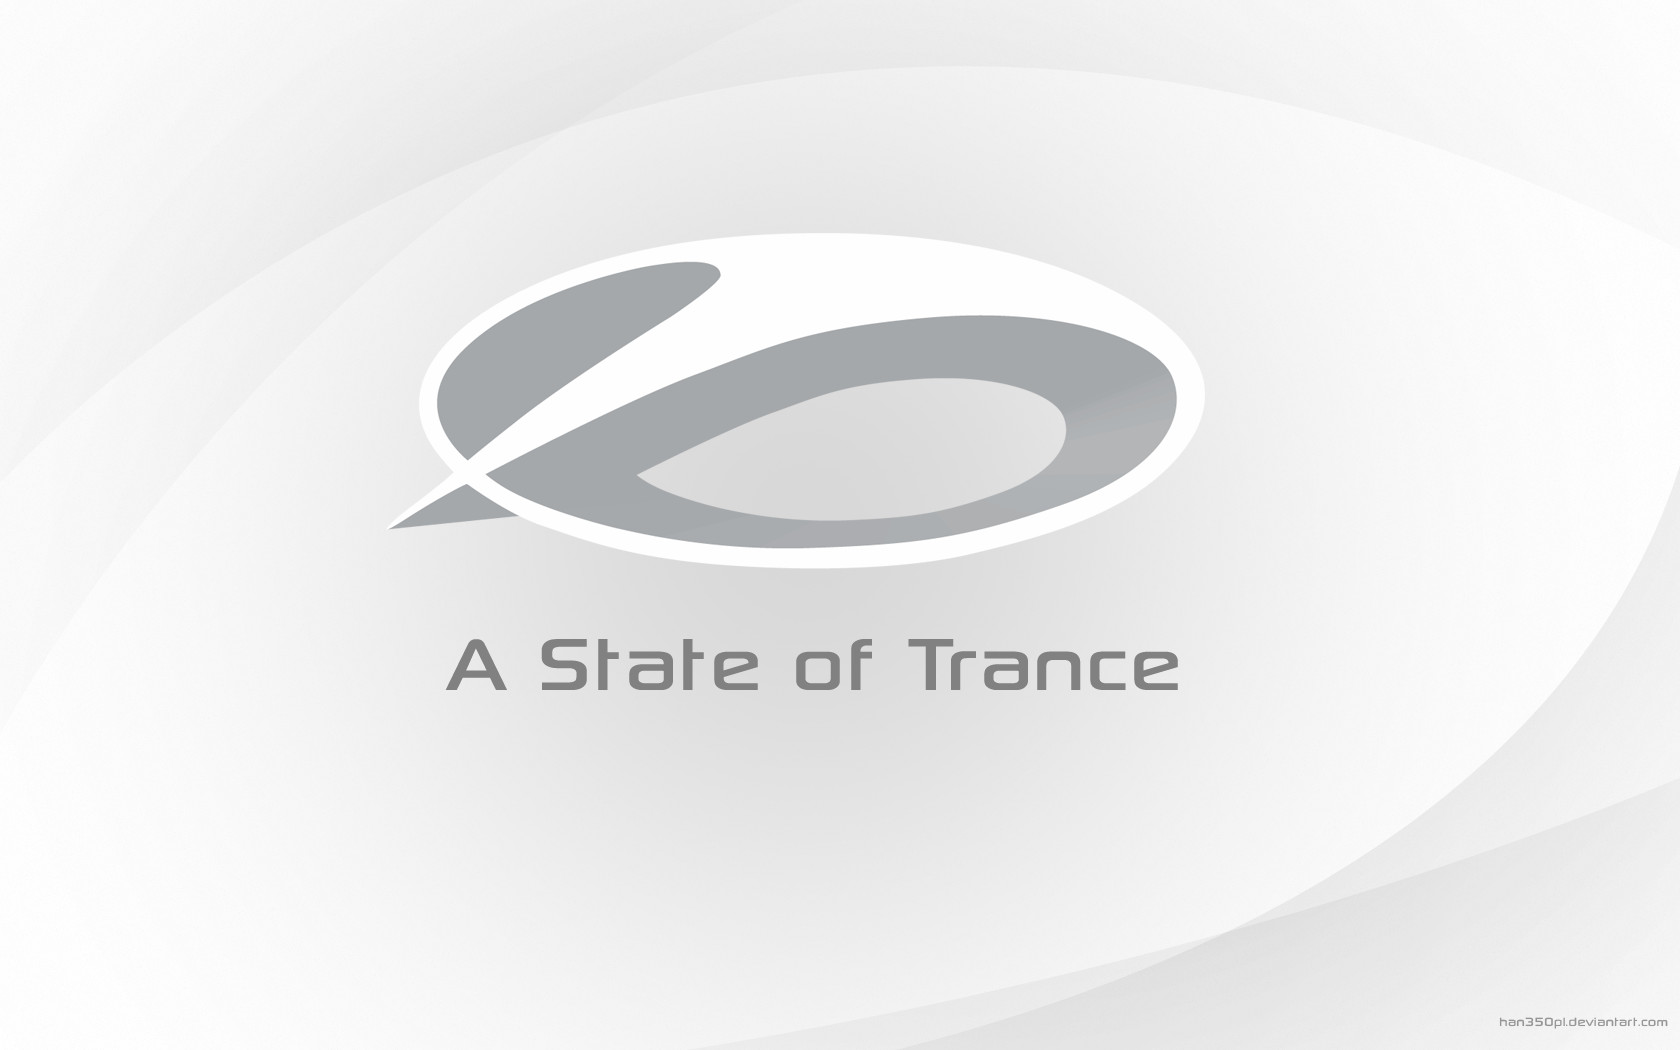 A State Of Trance Wallpaper By Han350pl